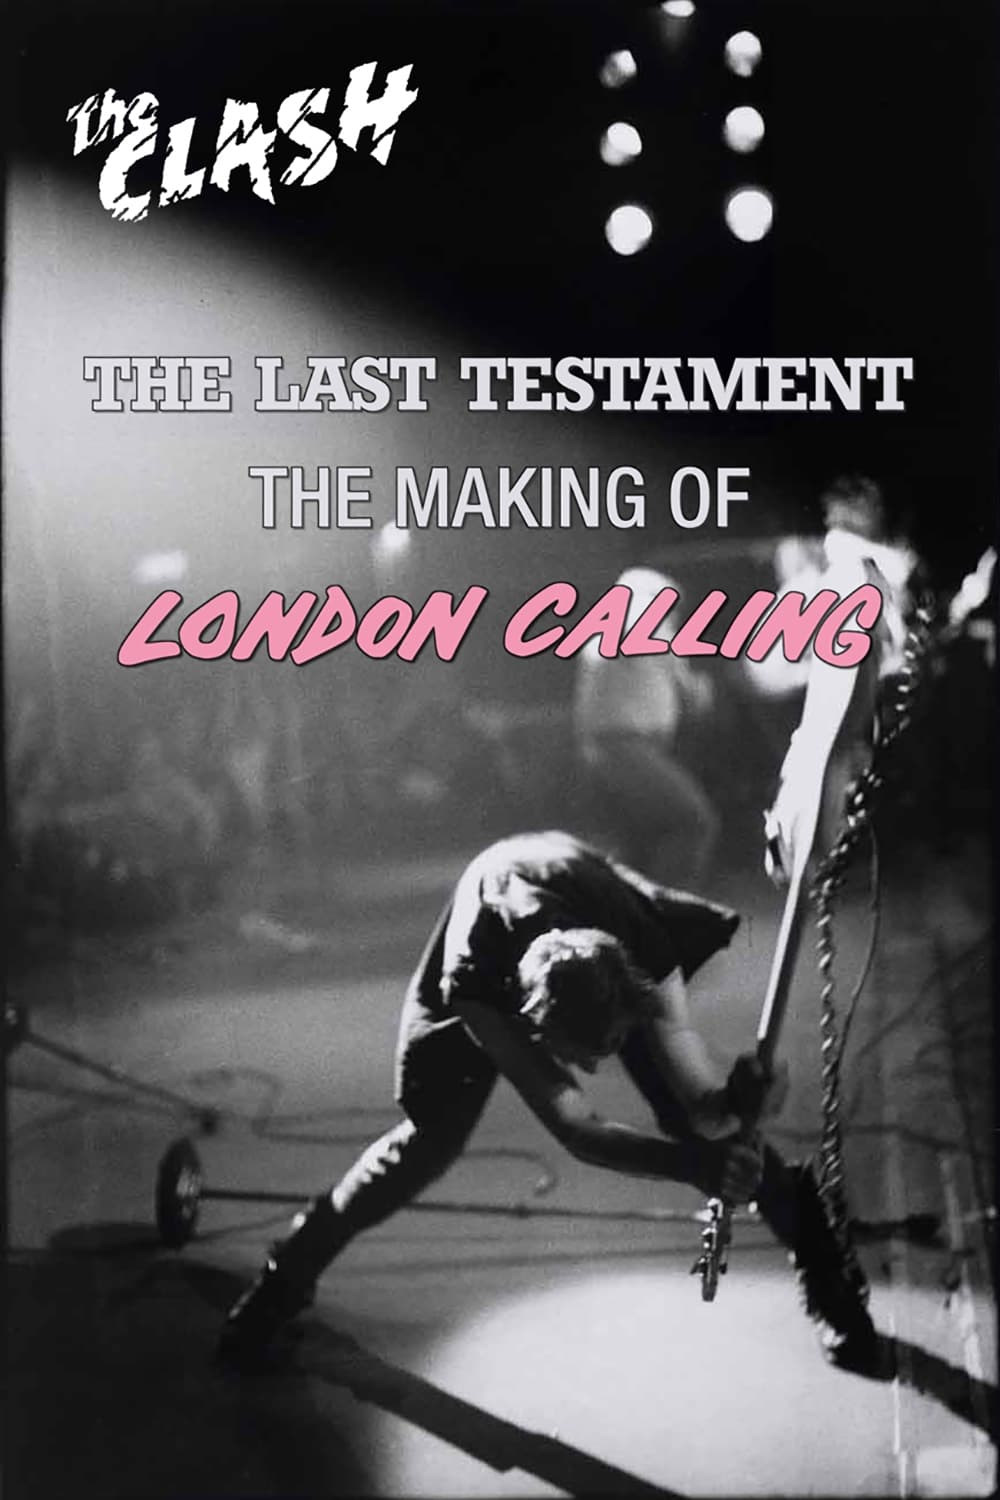 The Clash: The Last Testament - The Making of London Calling